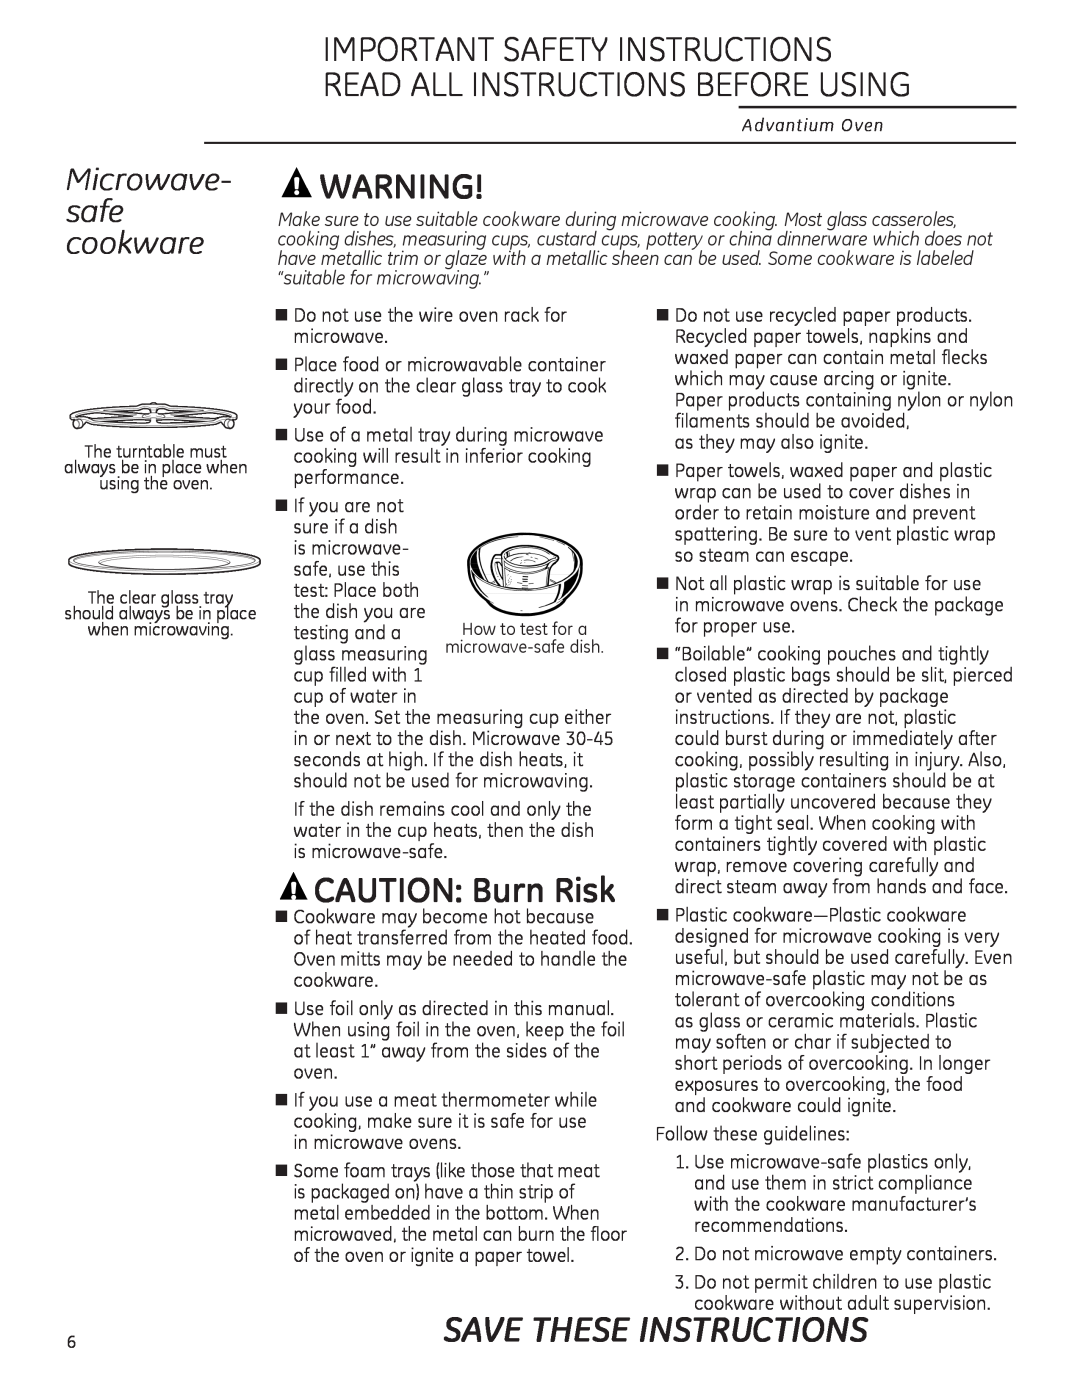 GE ZSA2201 owner manual Instructions, CAUTION Burn Risk, Microwave- safe cookware, Save These 